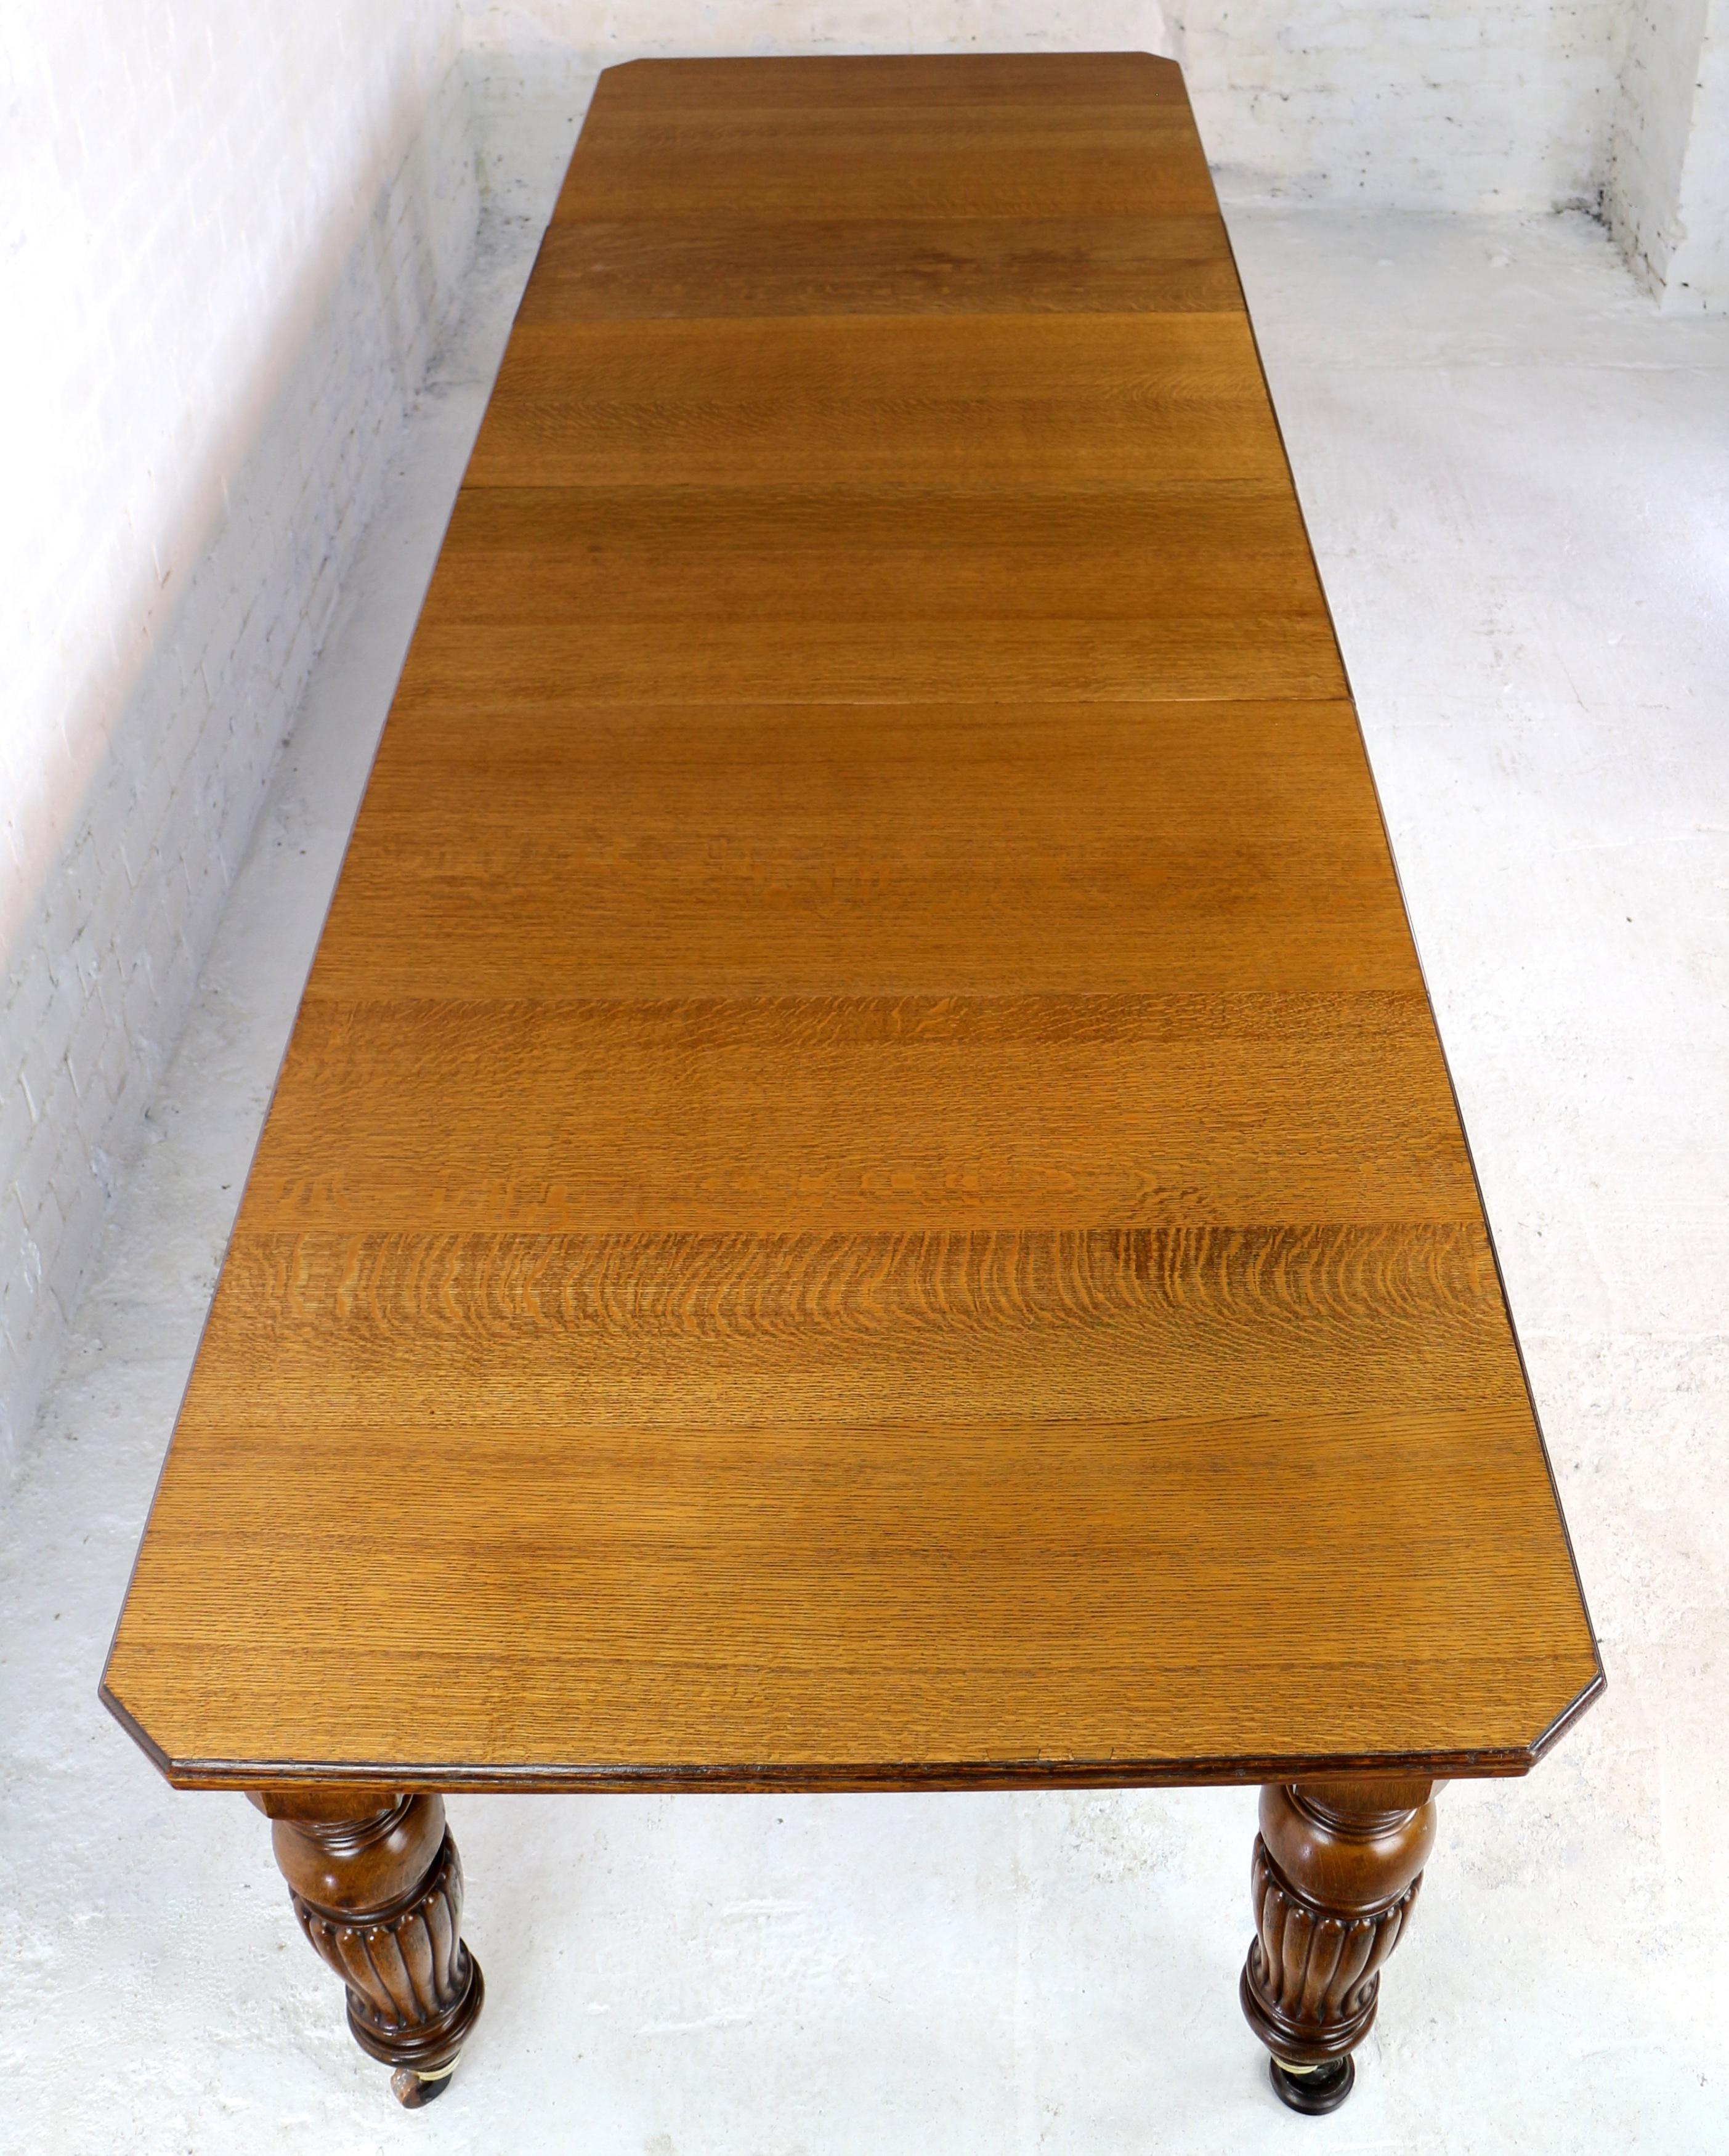 Antique English Victorian Oak Extending Dining Table and 4 Leaves by Selbat 3